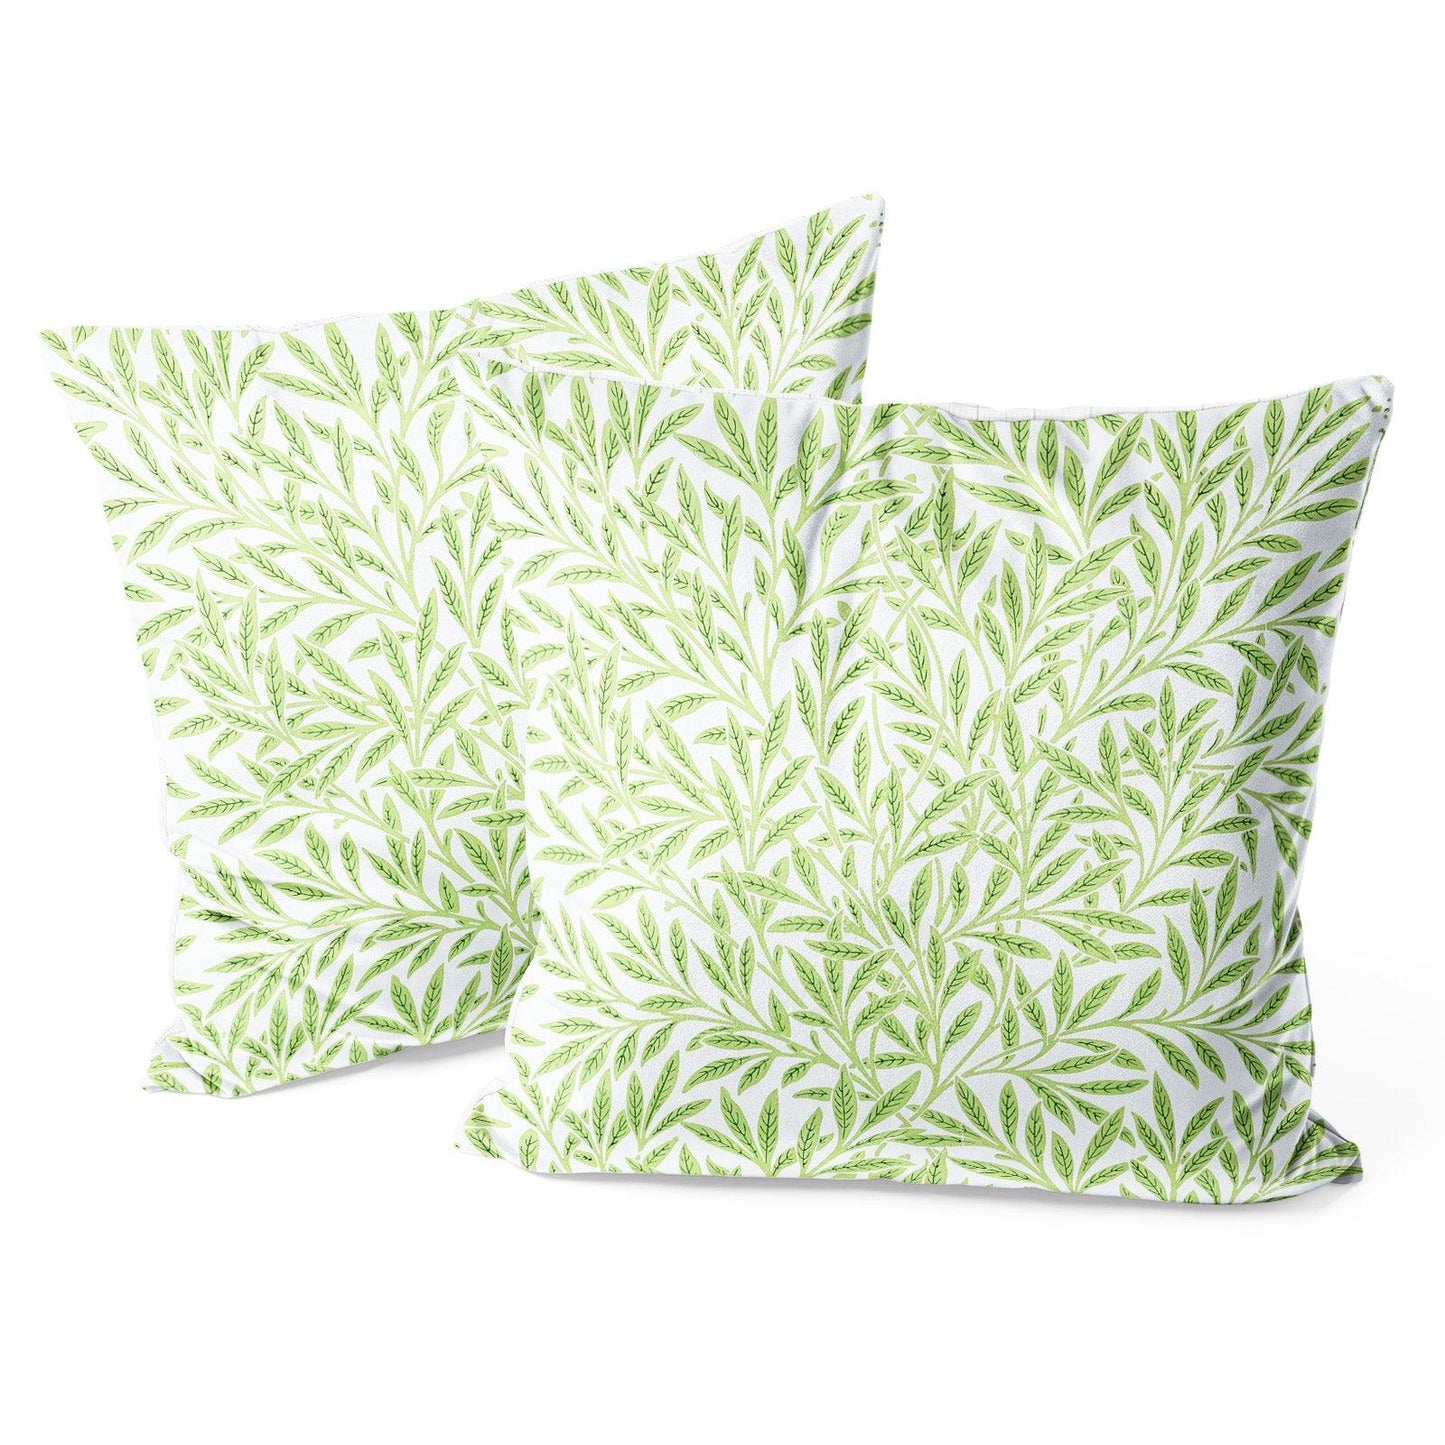 Art Flower Throw Pillow Covers Pack of 2 18x18 Inch (Willow by William Morris) - Berkin Arts